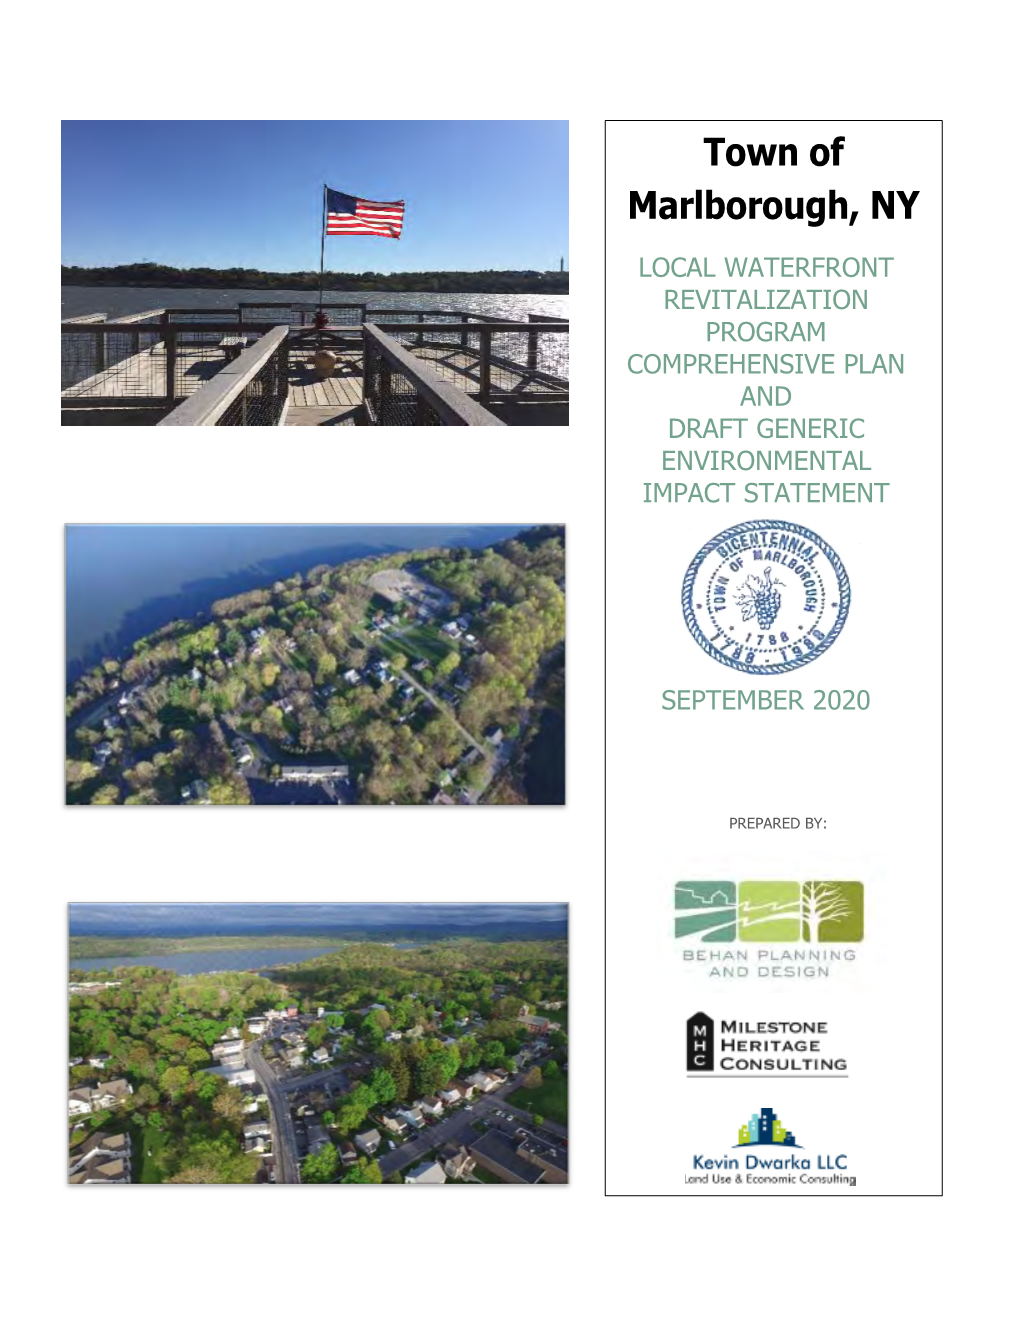 Town of Marlborough LWRP and Comprehensive Plan Advisory Committee, with Assistance from Behan Planning and Design